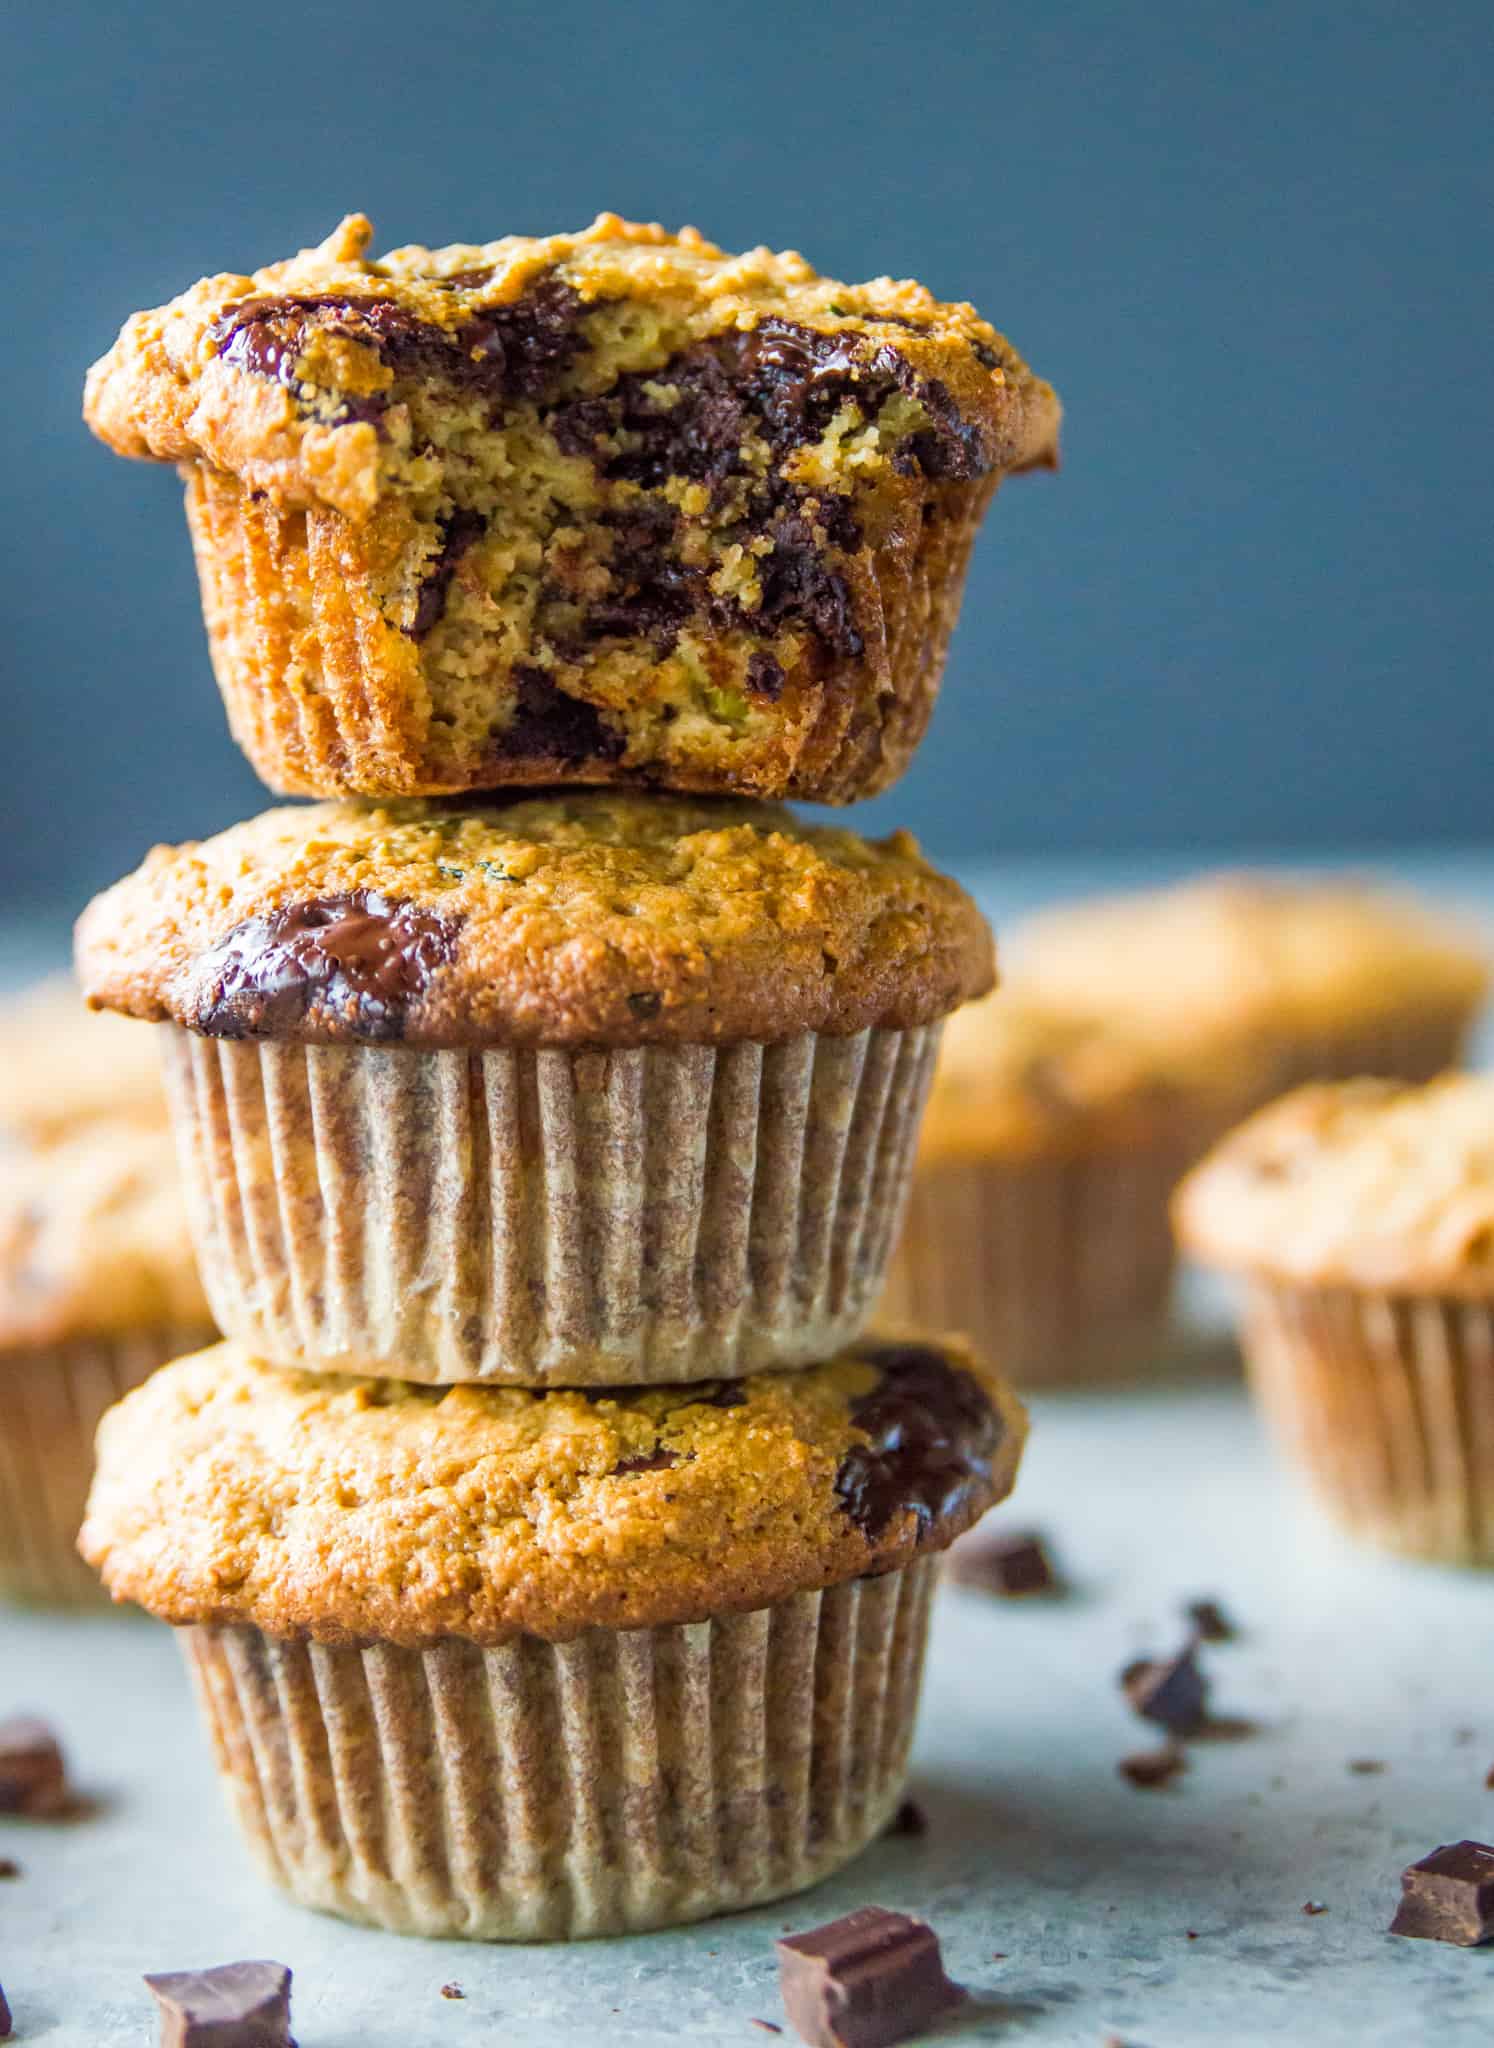 A stack of three zucchini muffins, the top one with a bite out of it showing chunks of chocolate.